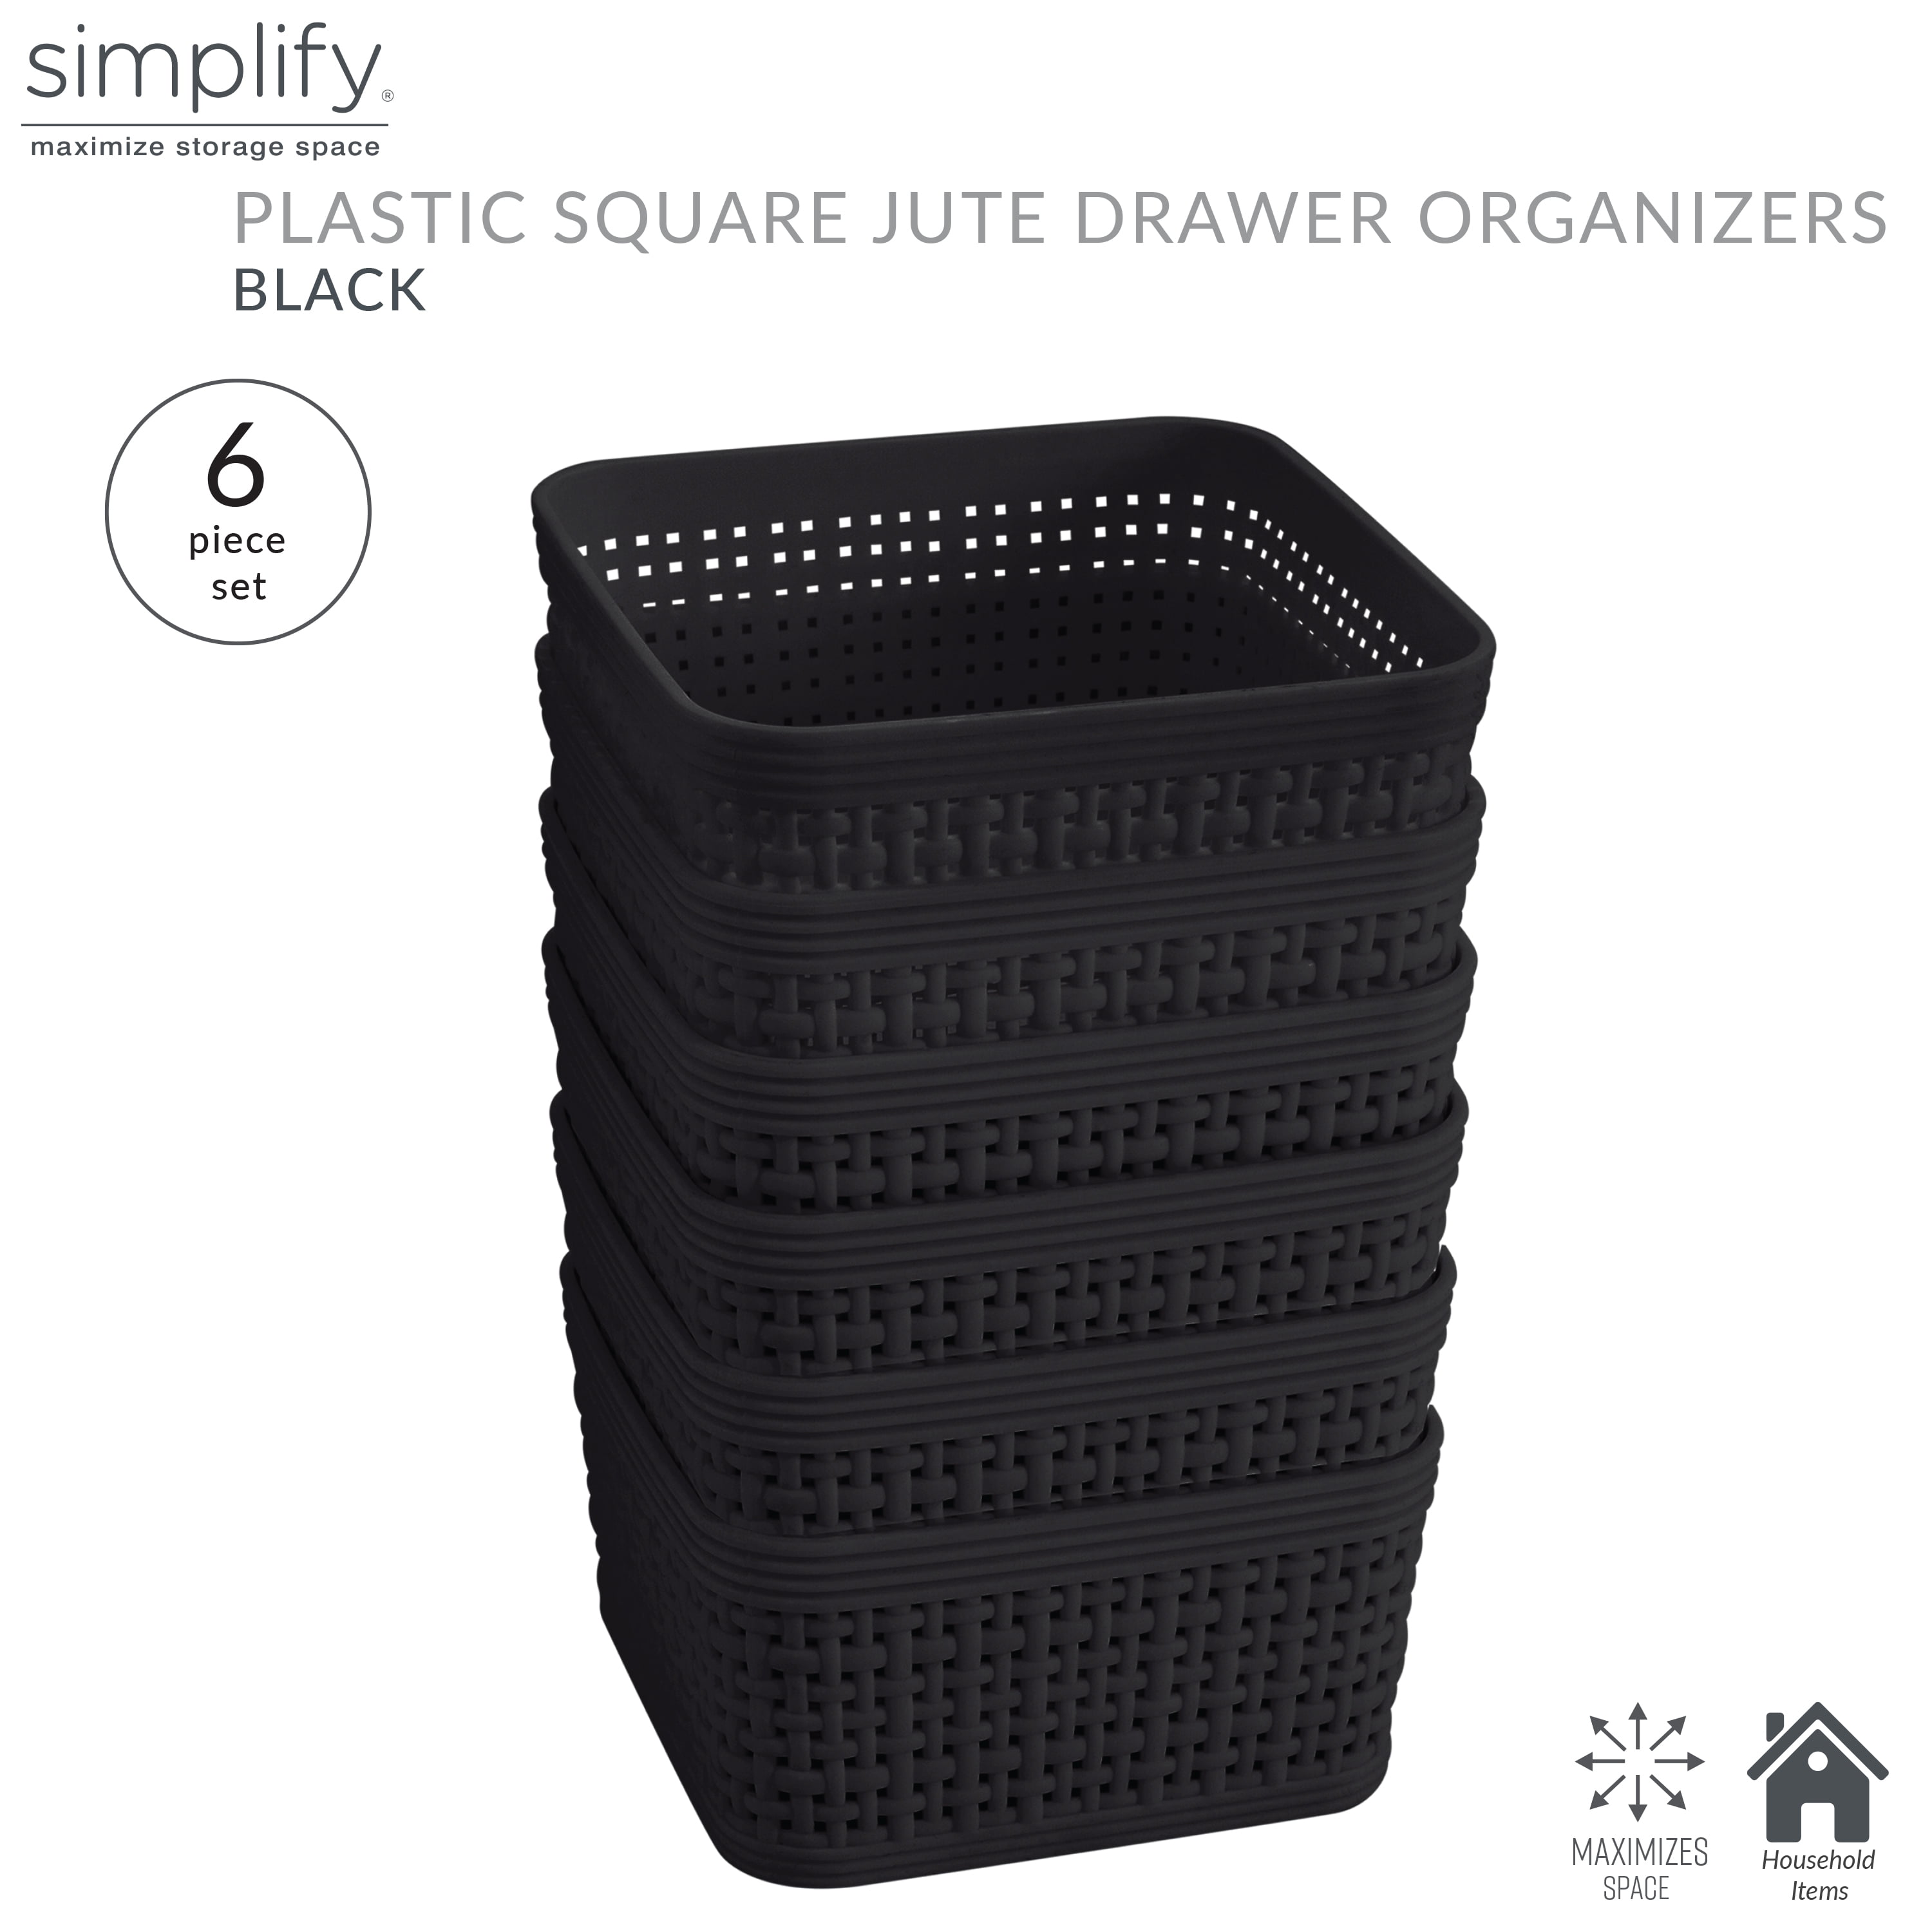 Yesland 6 Pack Plastic Storage Basket, Black Basket Organizer Bin with  Handles for Home Office Closet, 6 x 12 x 5 Inches